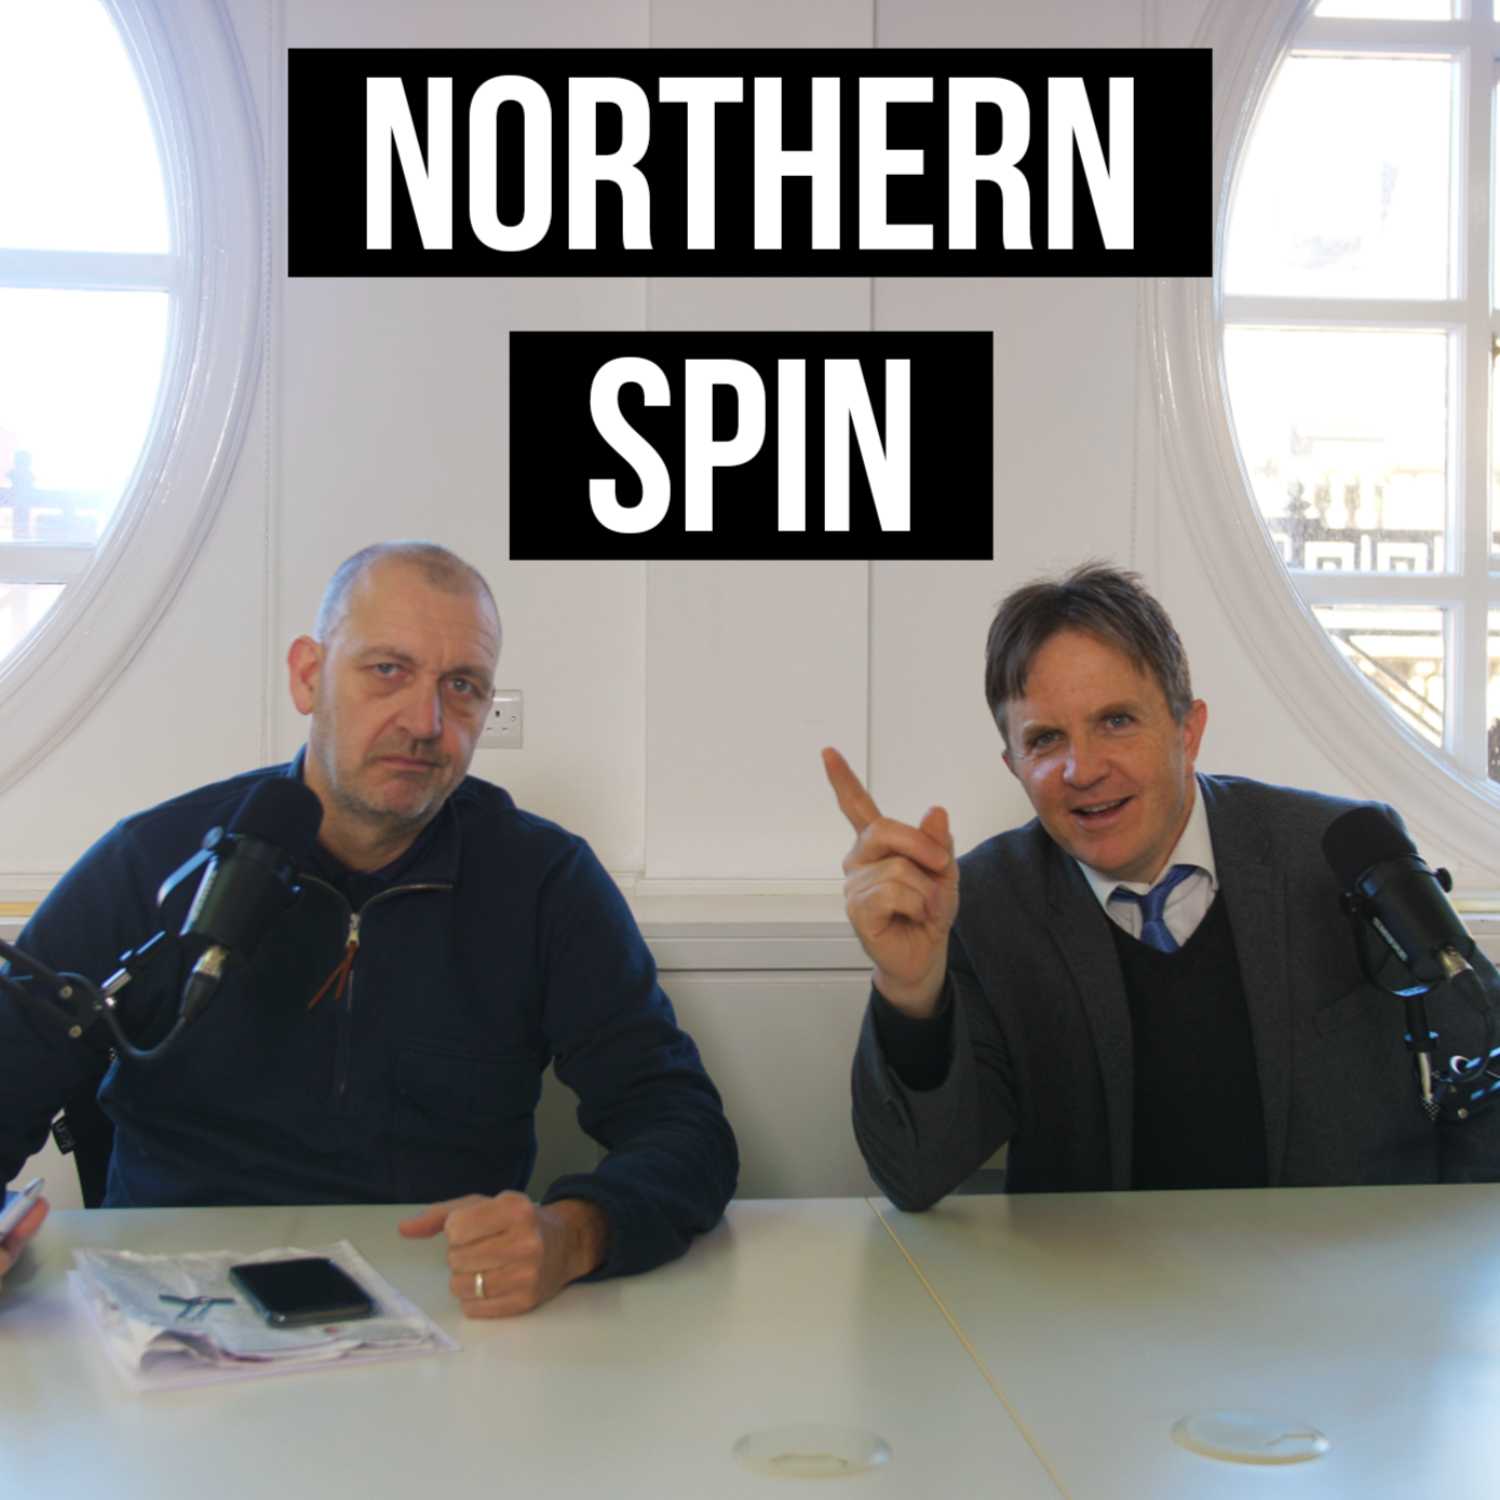 Northern Spin - Season 4 - Episode 1: Tories Lose Everywhere to Everyone